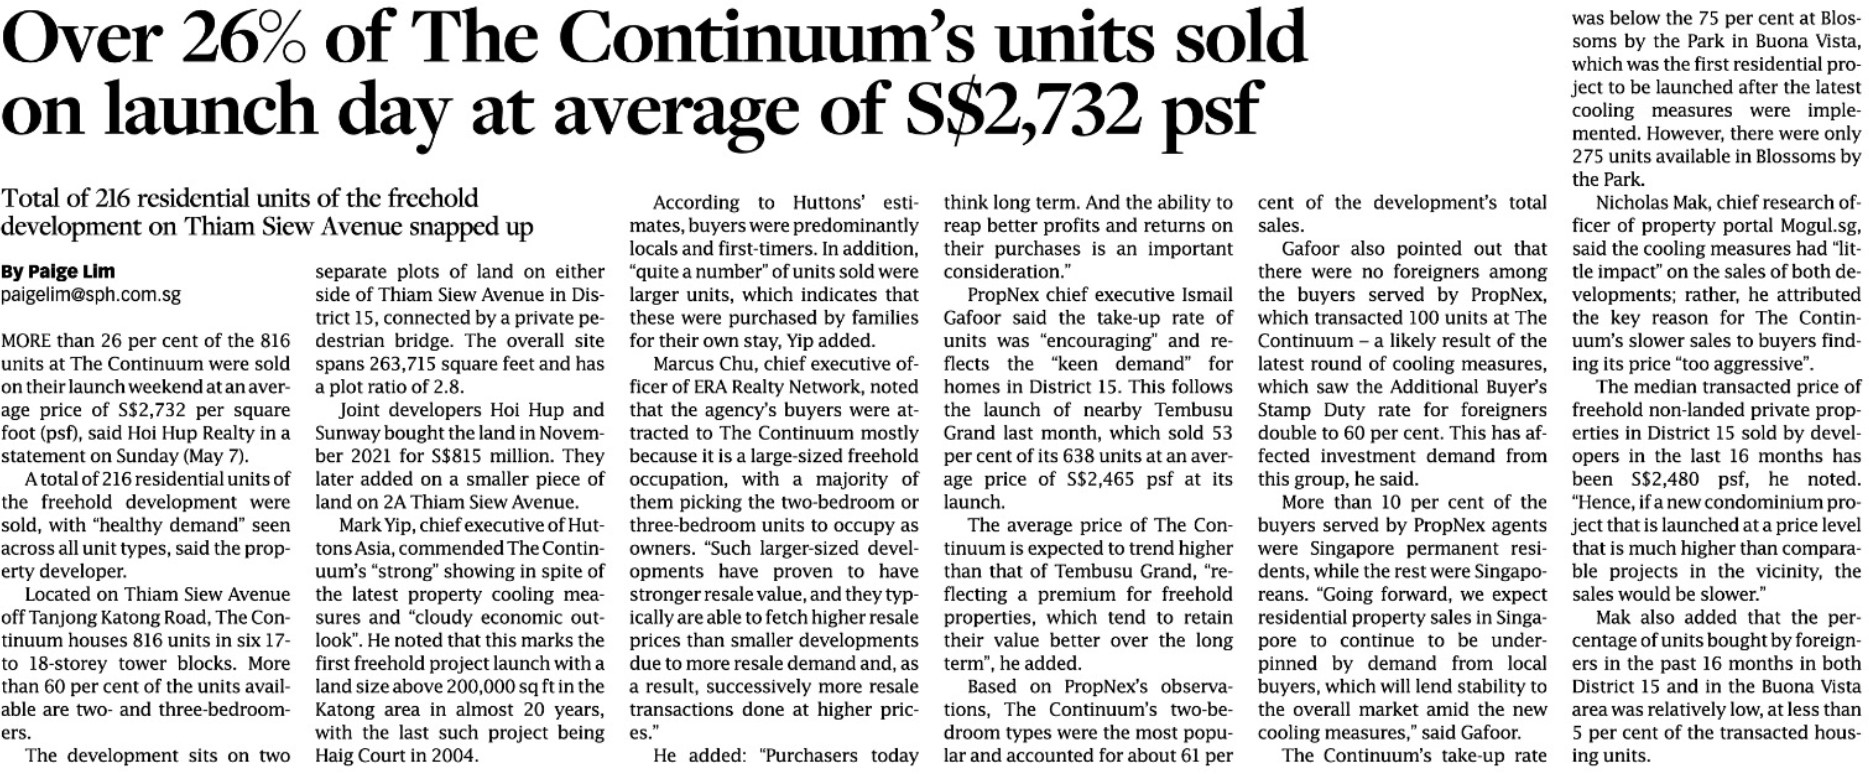 the-continuum-over-26%-of-the-continuum-unit-sold-on-launch-day-at-average-of-2732psf-singapore